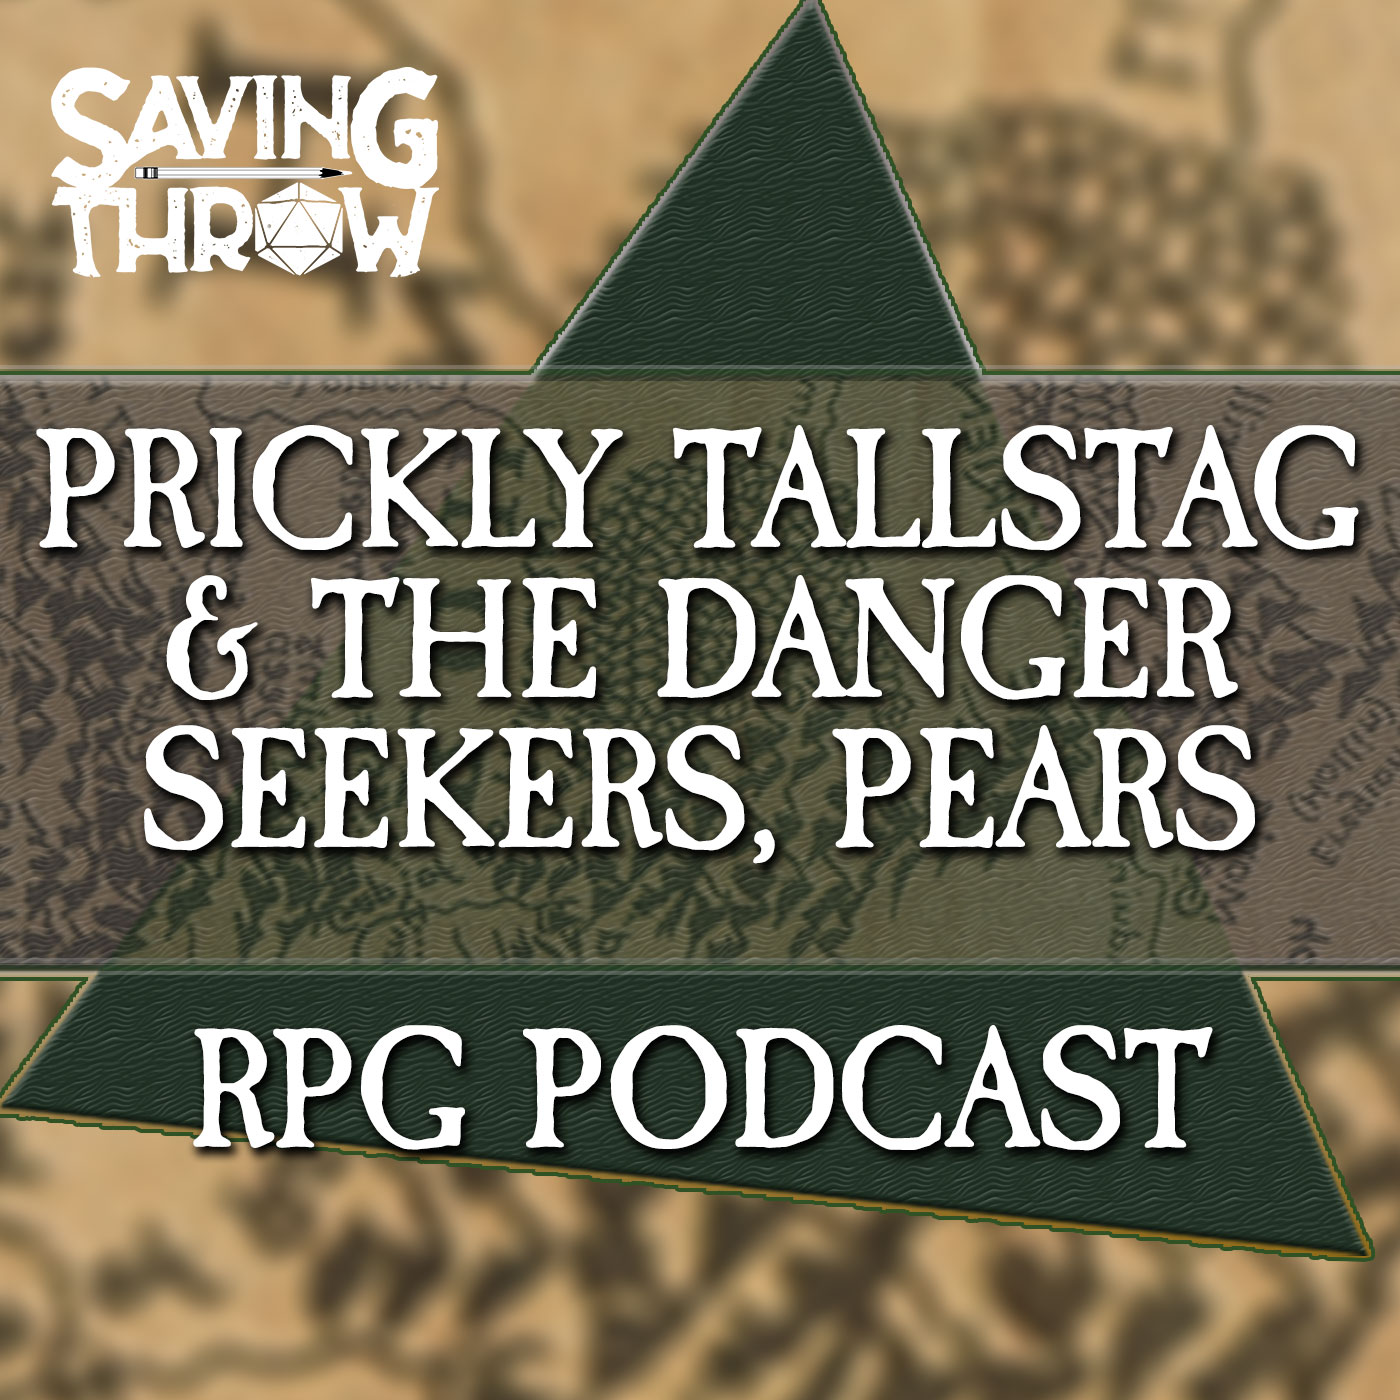 Prickly Tallstag & the Danger Seekers, Pears